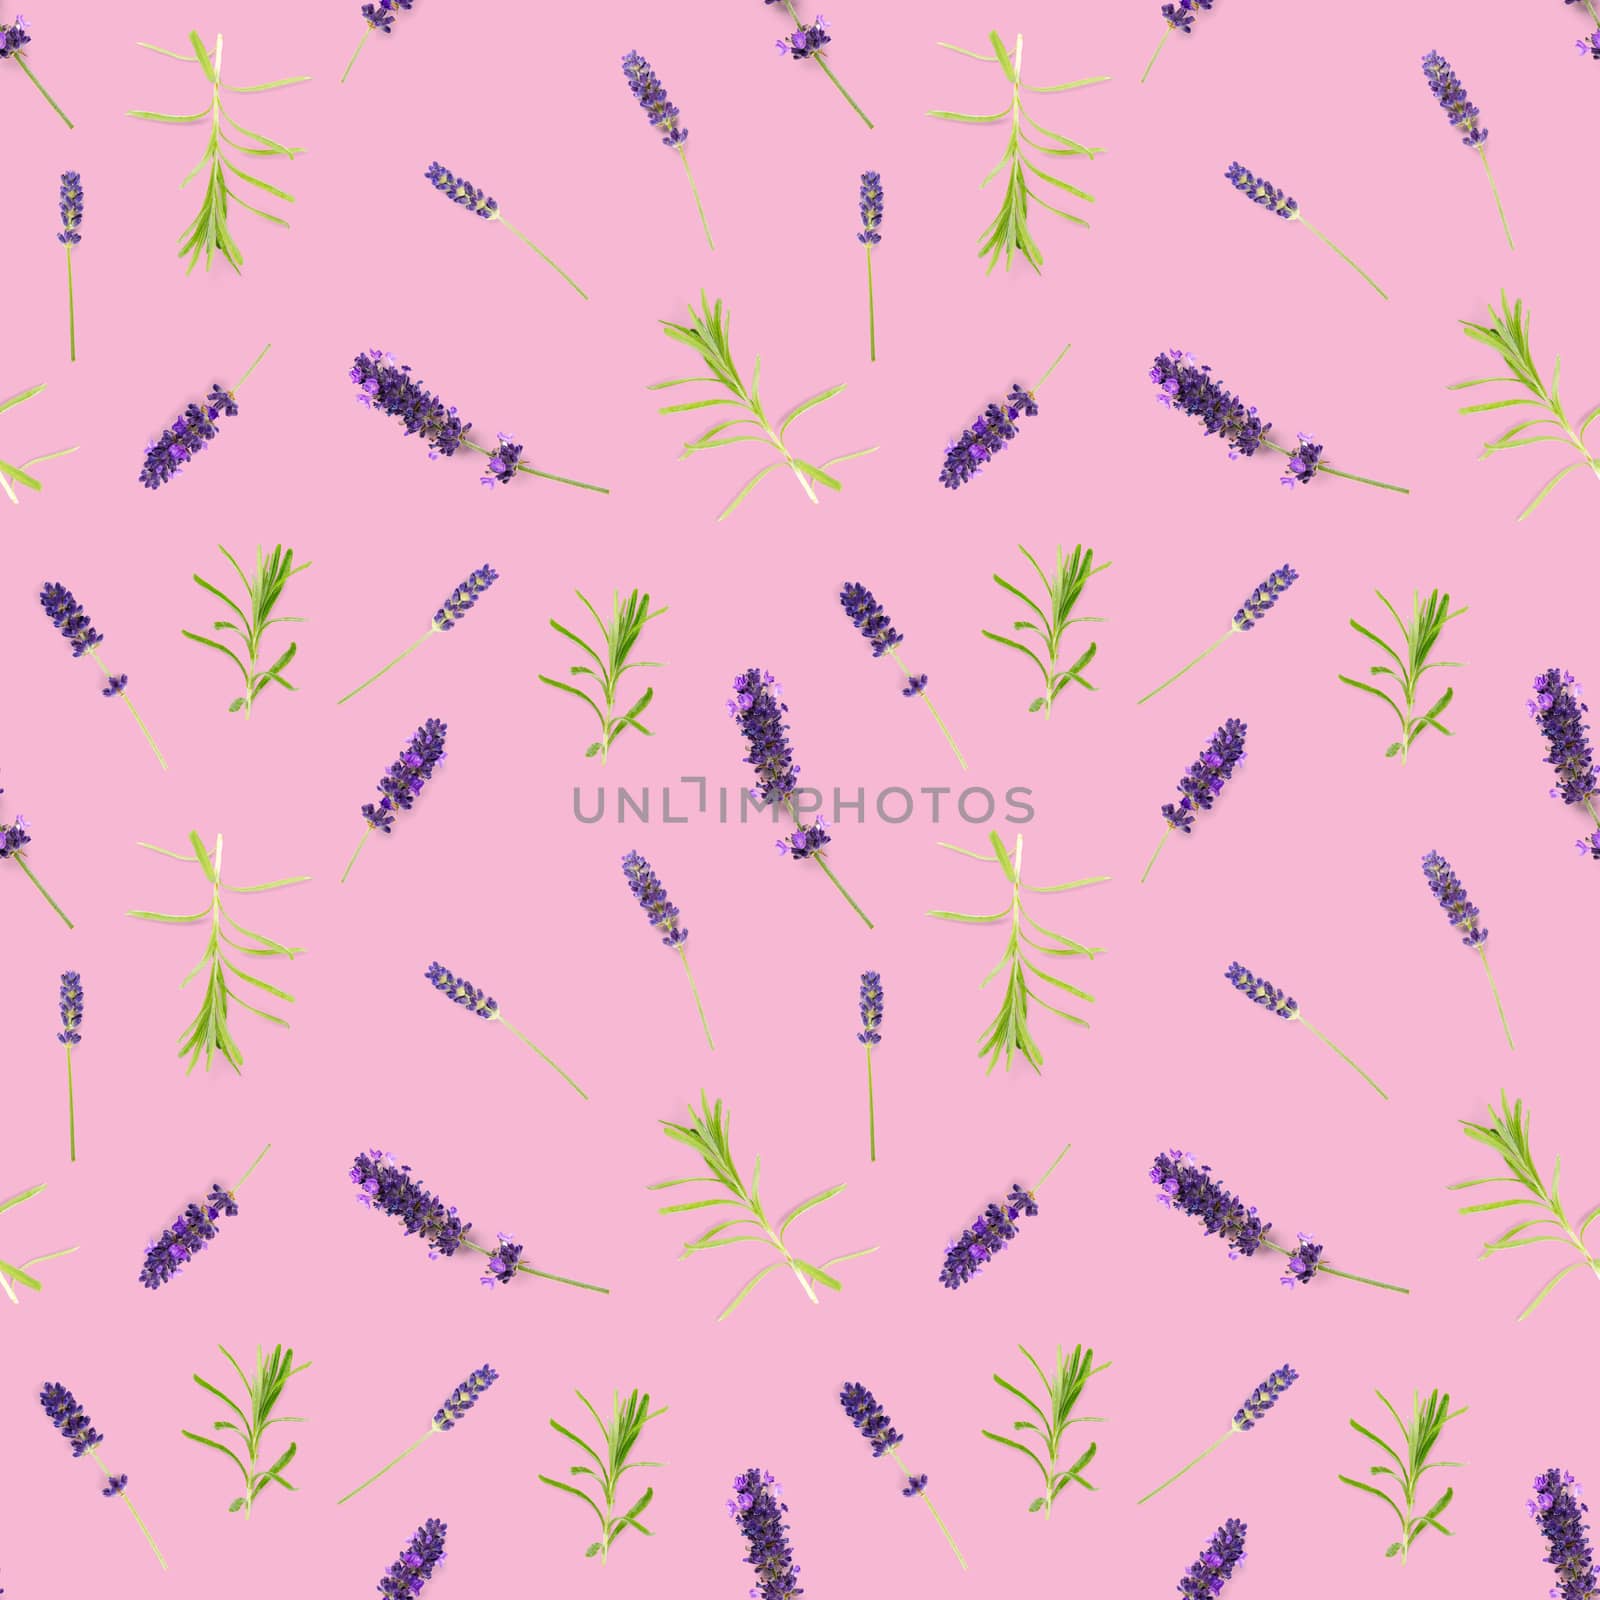 seamless pattern made from lavender flowers isolated on pink. fresh lavendel blossoms background. floral pattern.